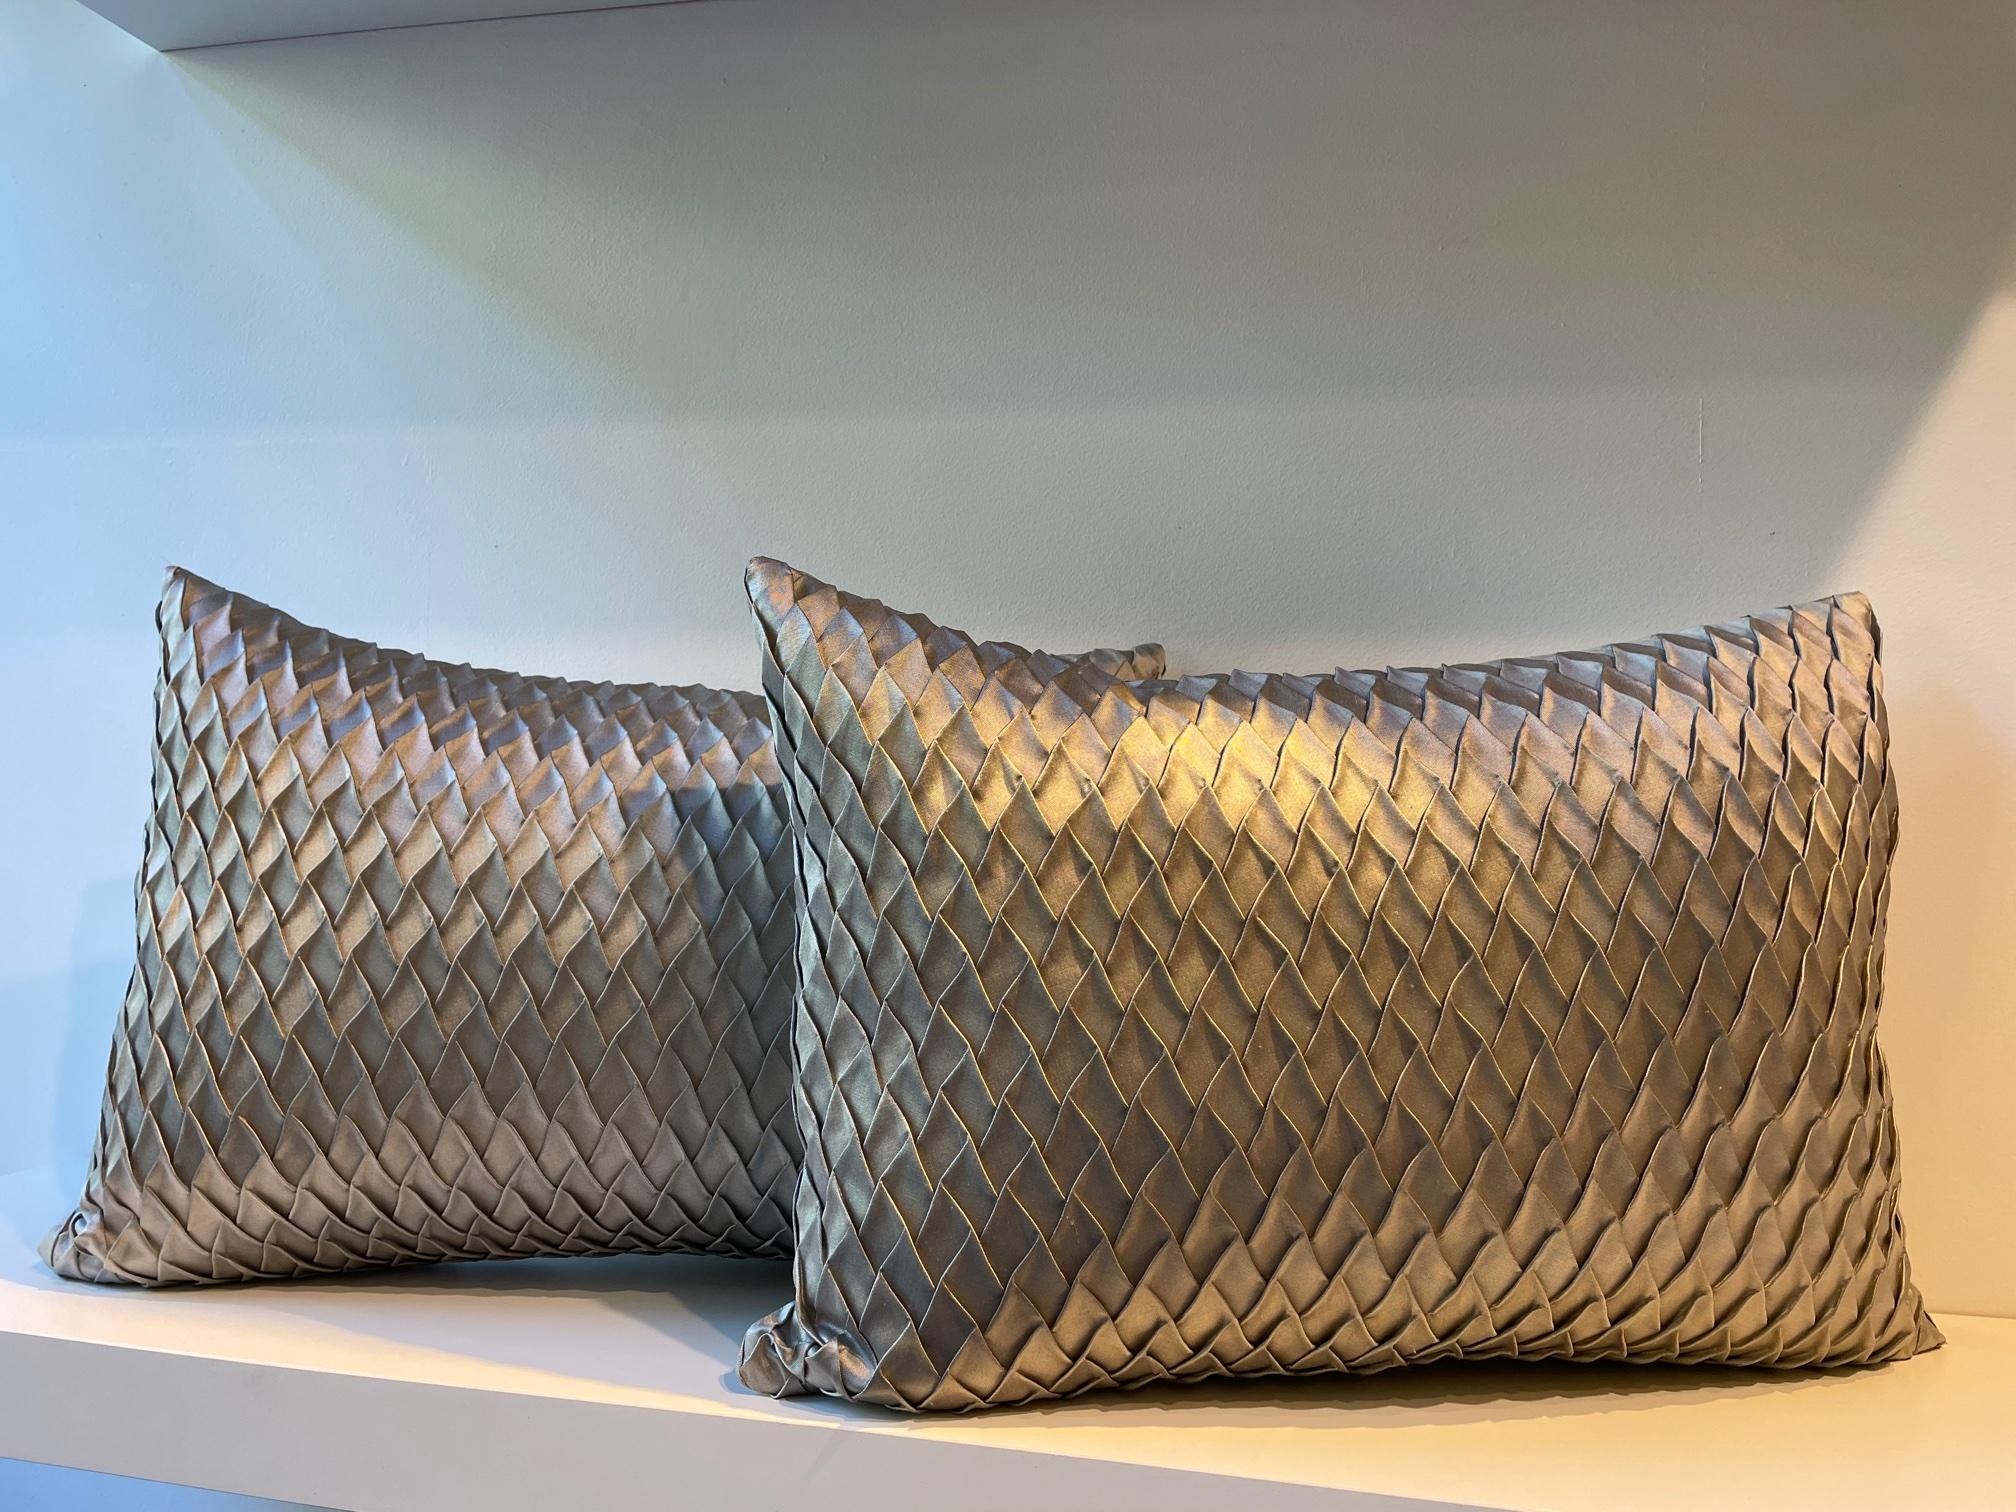 One pair silk cushions with embossed front panel in steam pleated Taffeta silk , fish scale pattern, back panel plain silk, handwoven silk Taffeta col. White Gold, size 35 x 50cm,
cushion cover with concealed zipper in the bottom seam,
inner pad